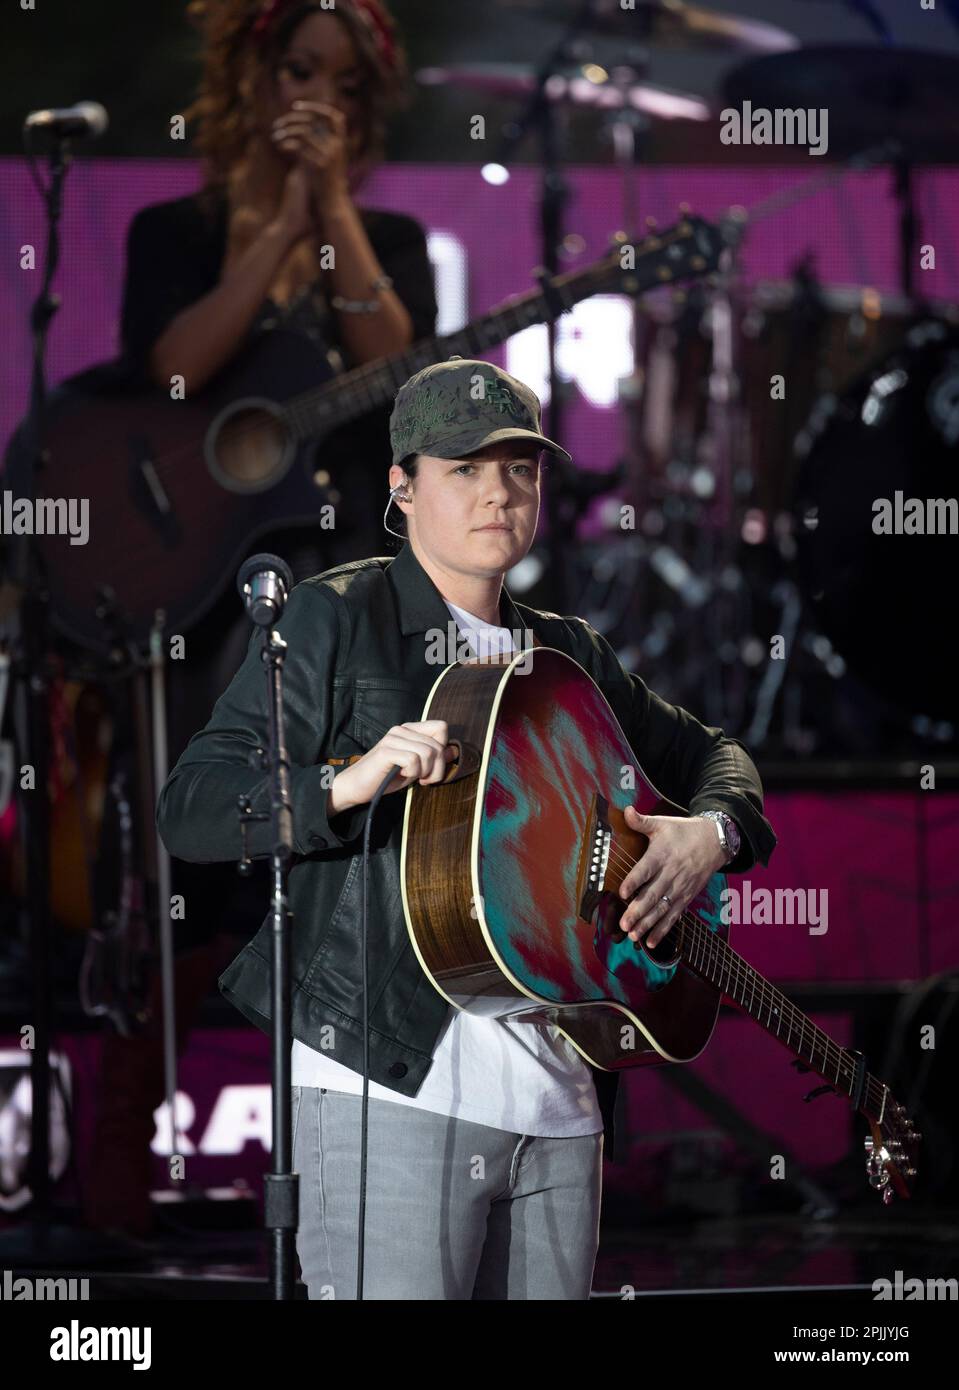 Austin Texas USA, April 1 2023: Country singer LILY ROSE performs during a taping of up and coming acts on the Ram Truck stage at the Country Music Television Awards outside the Moody Center. Credit: Bob Daemmrich/Alamy Live News Stock Photo